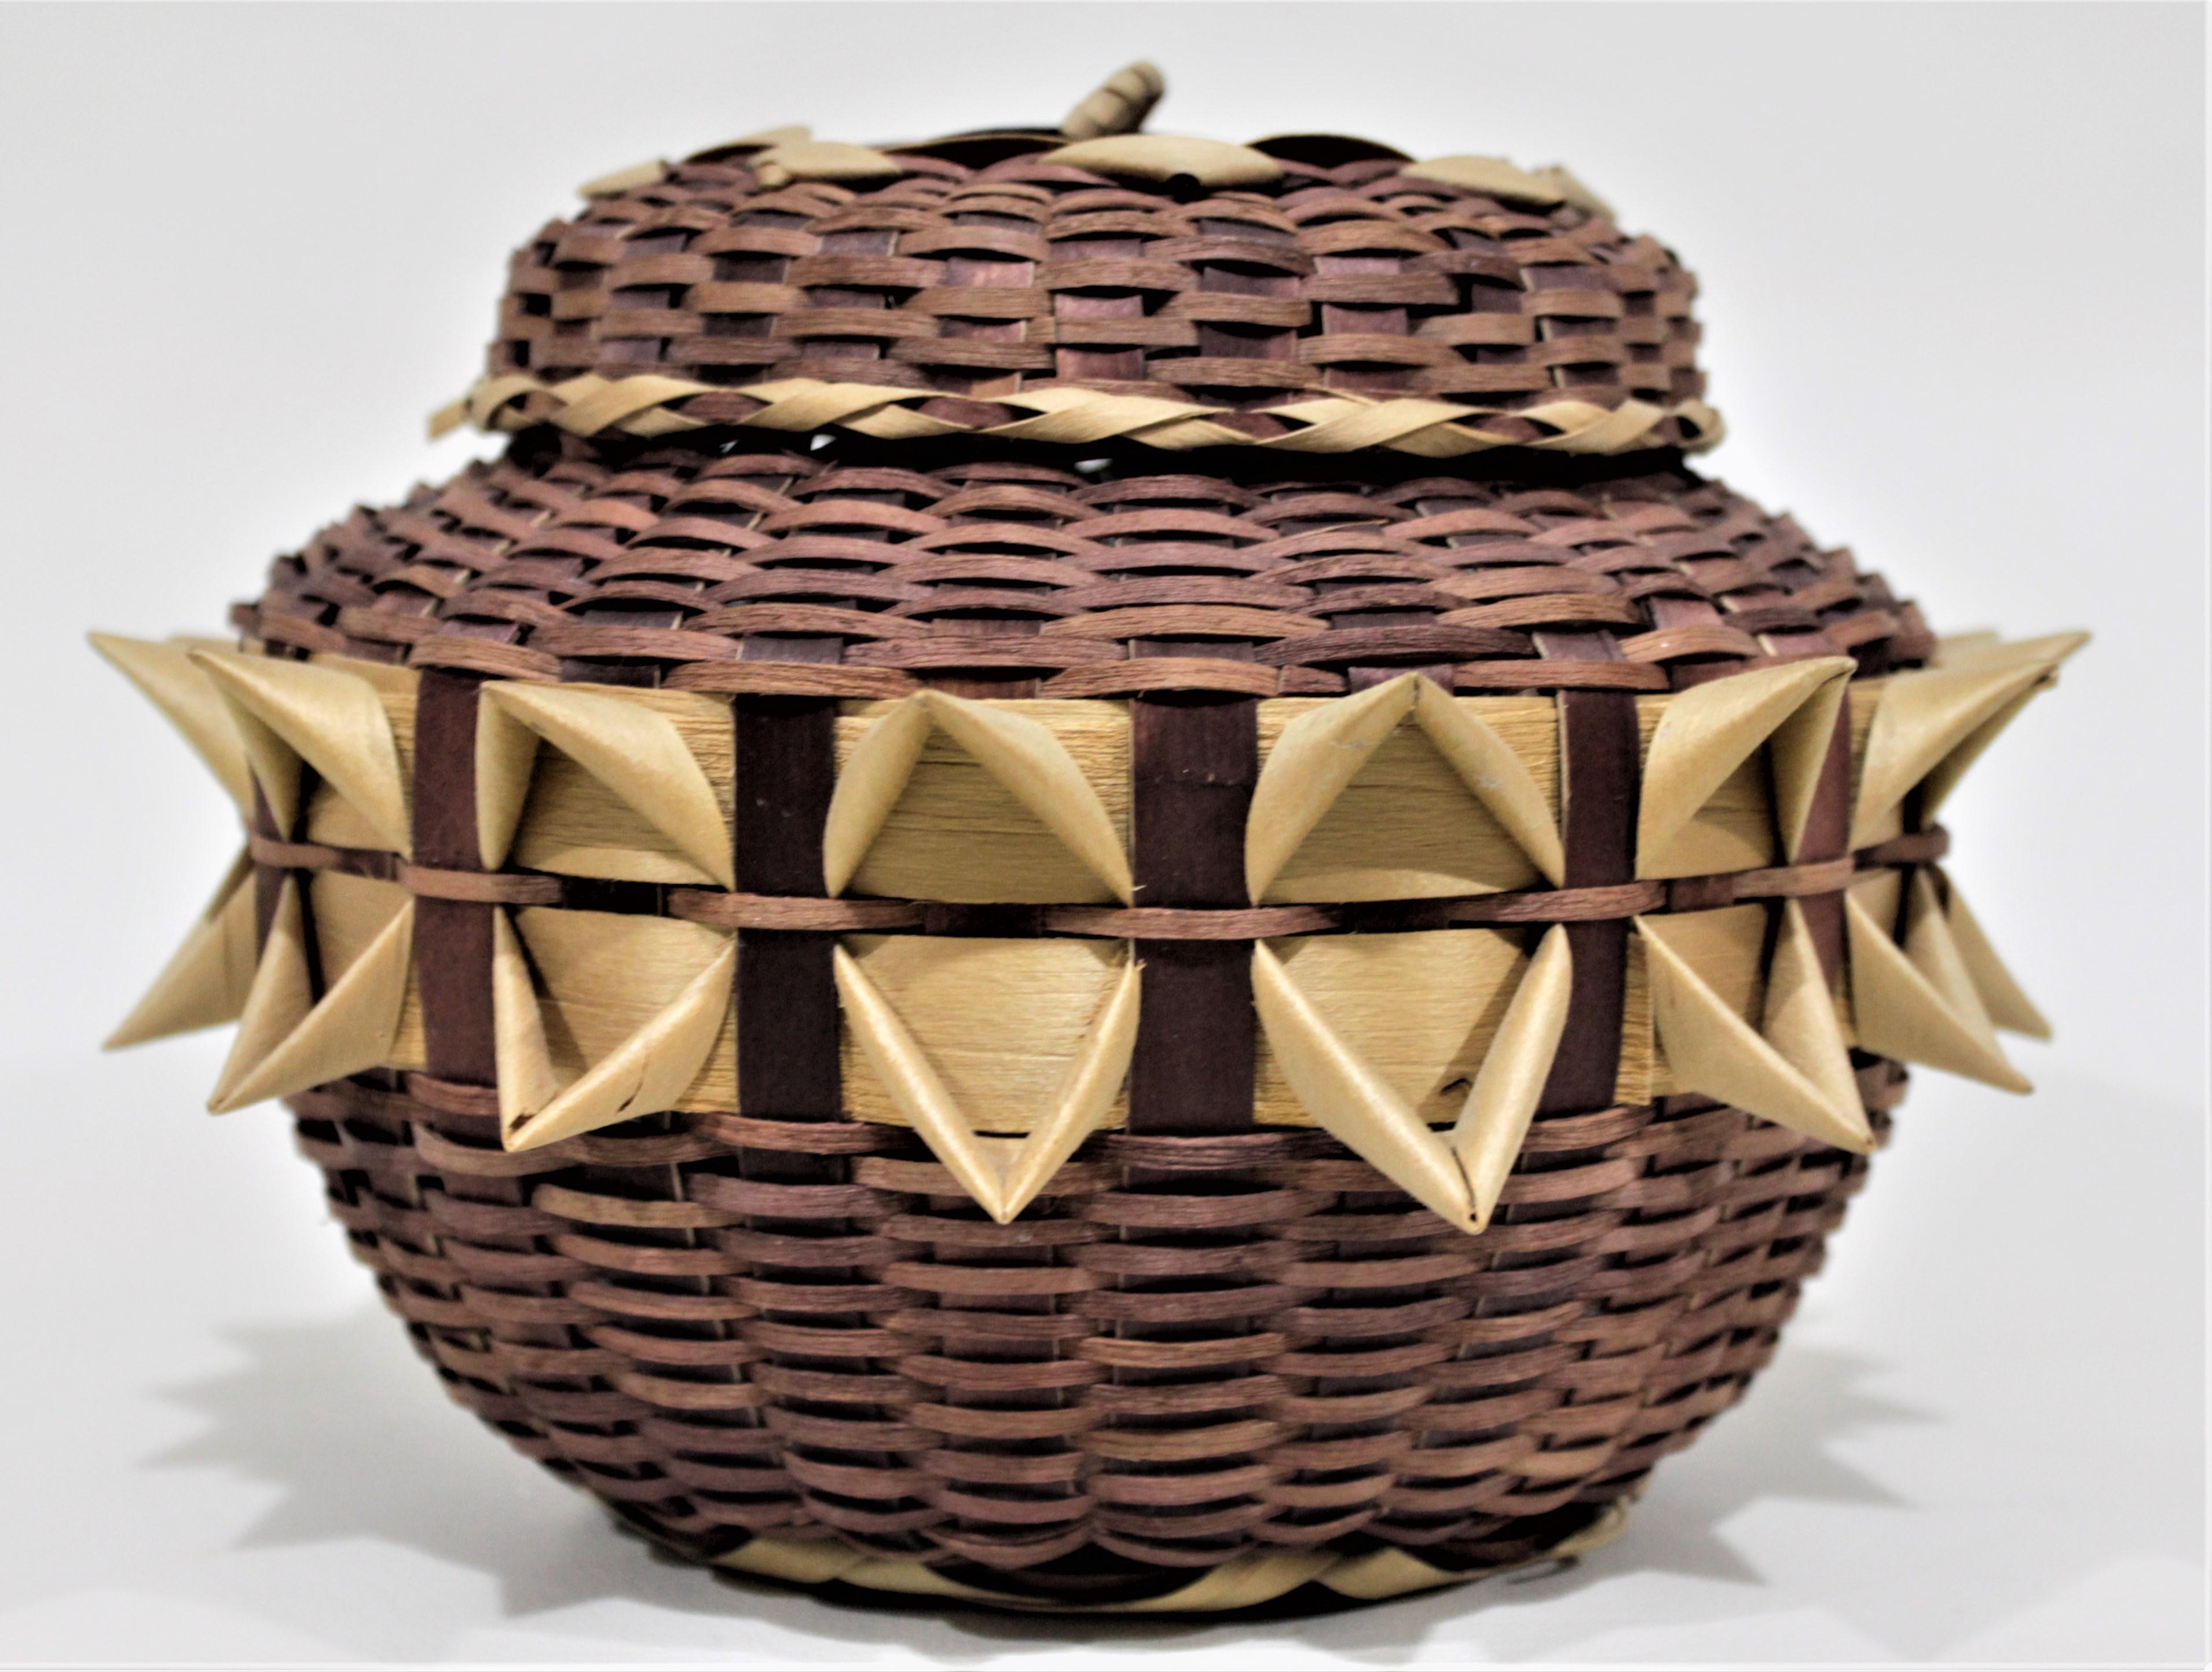 This Indigenous styled lidded basket is presumed to have been made in the United States in circa mid-late 20th century. The maker of the this basket is unknown, but done in the style of the North American indigenous people using the 'porcupine